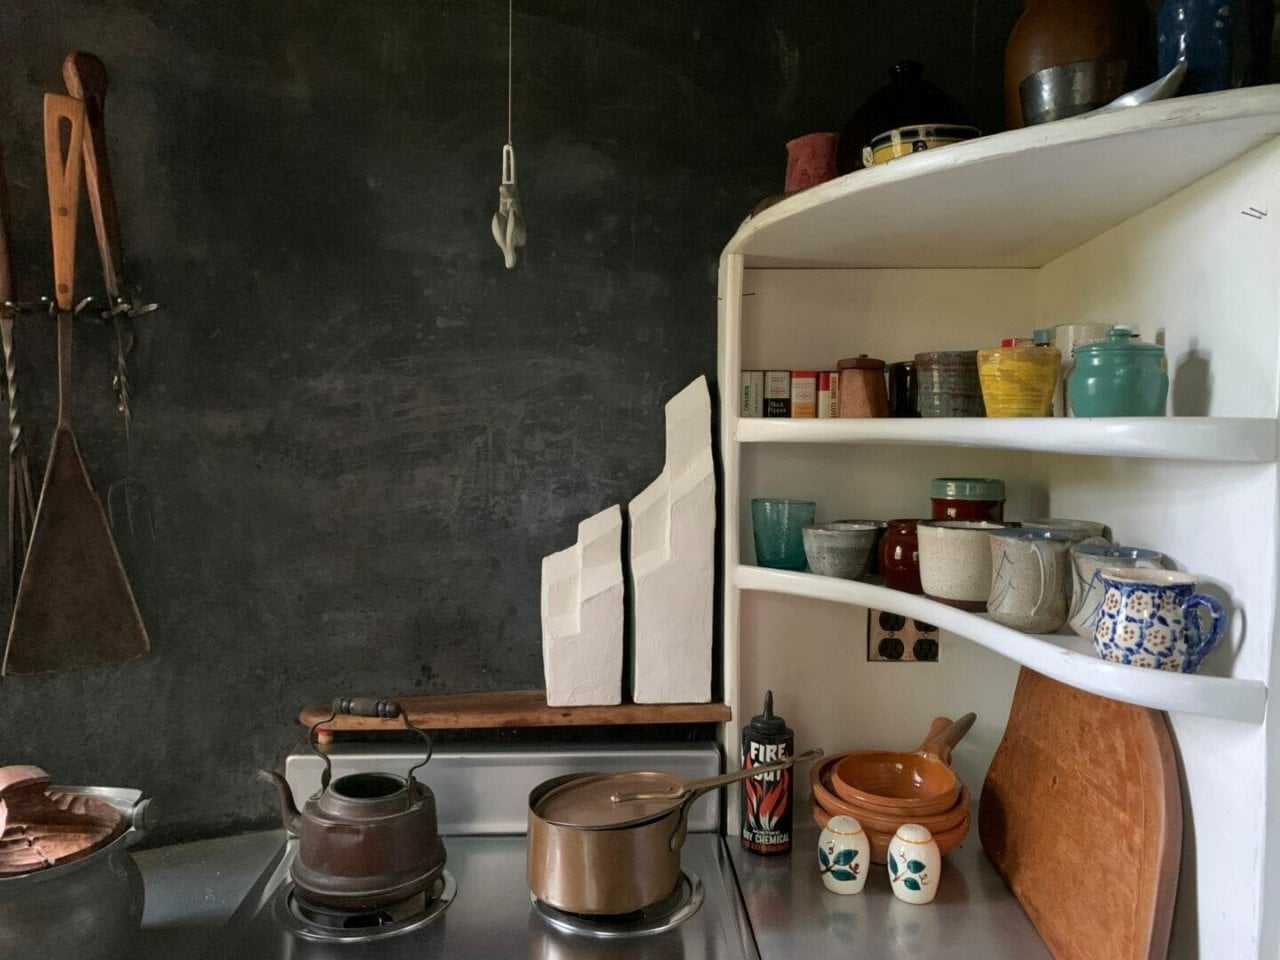 two stepped white sculptural forms sit on a shelf behind a kitchen stove. White shelves with kitchen items extend to the right.